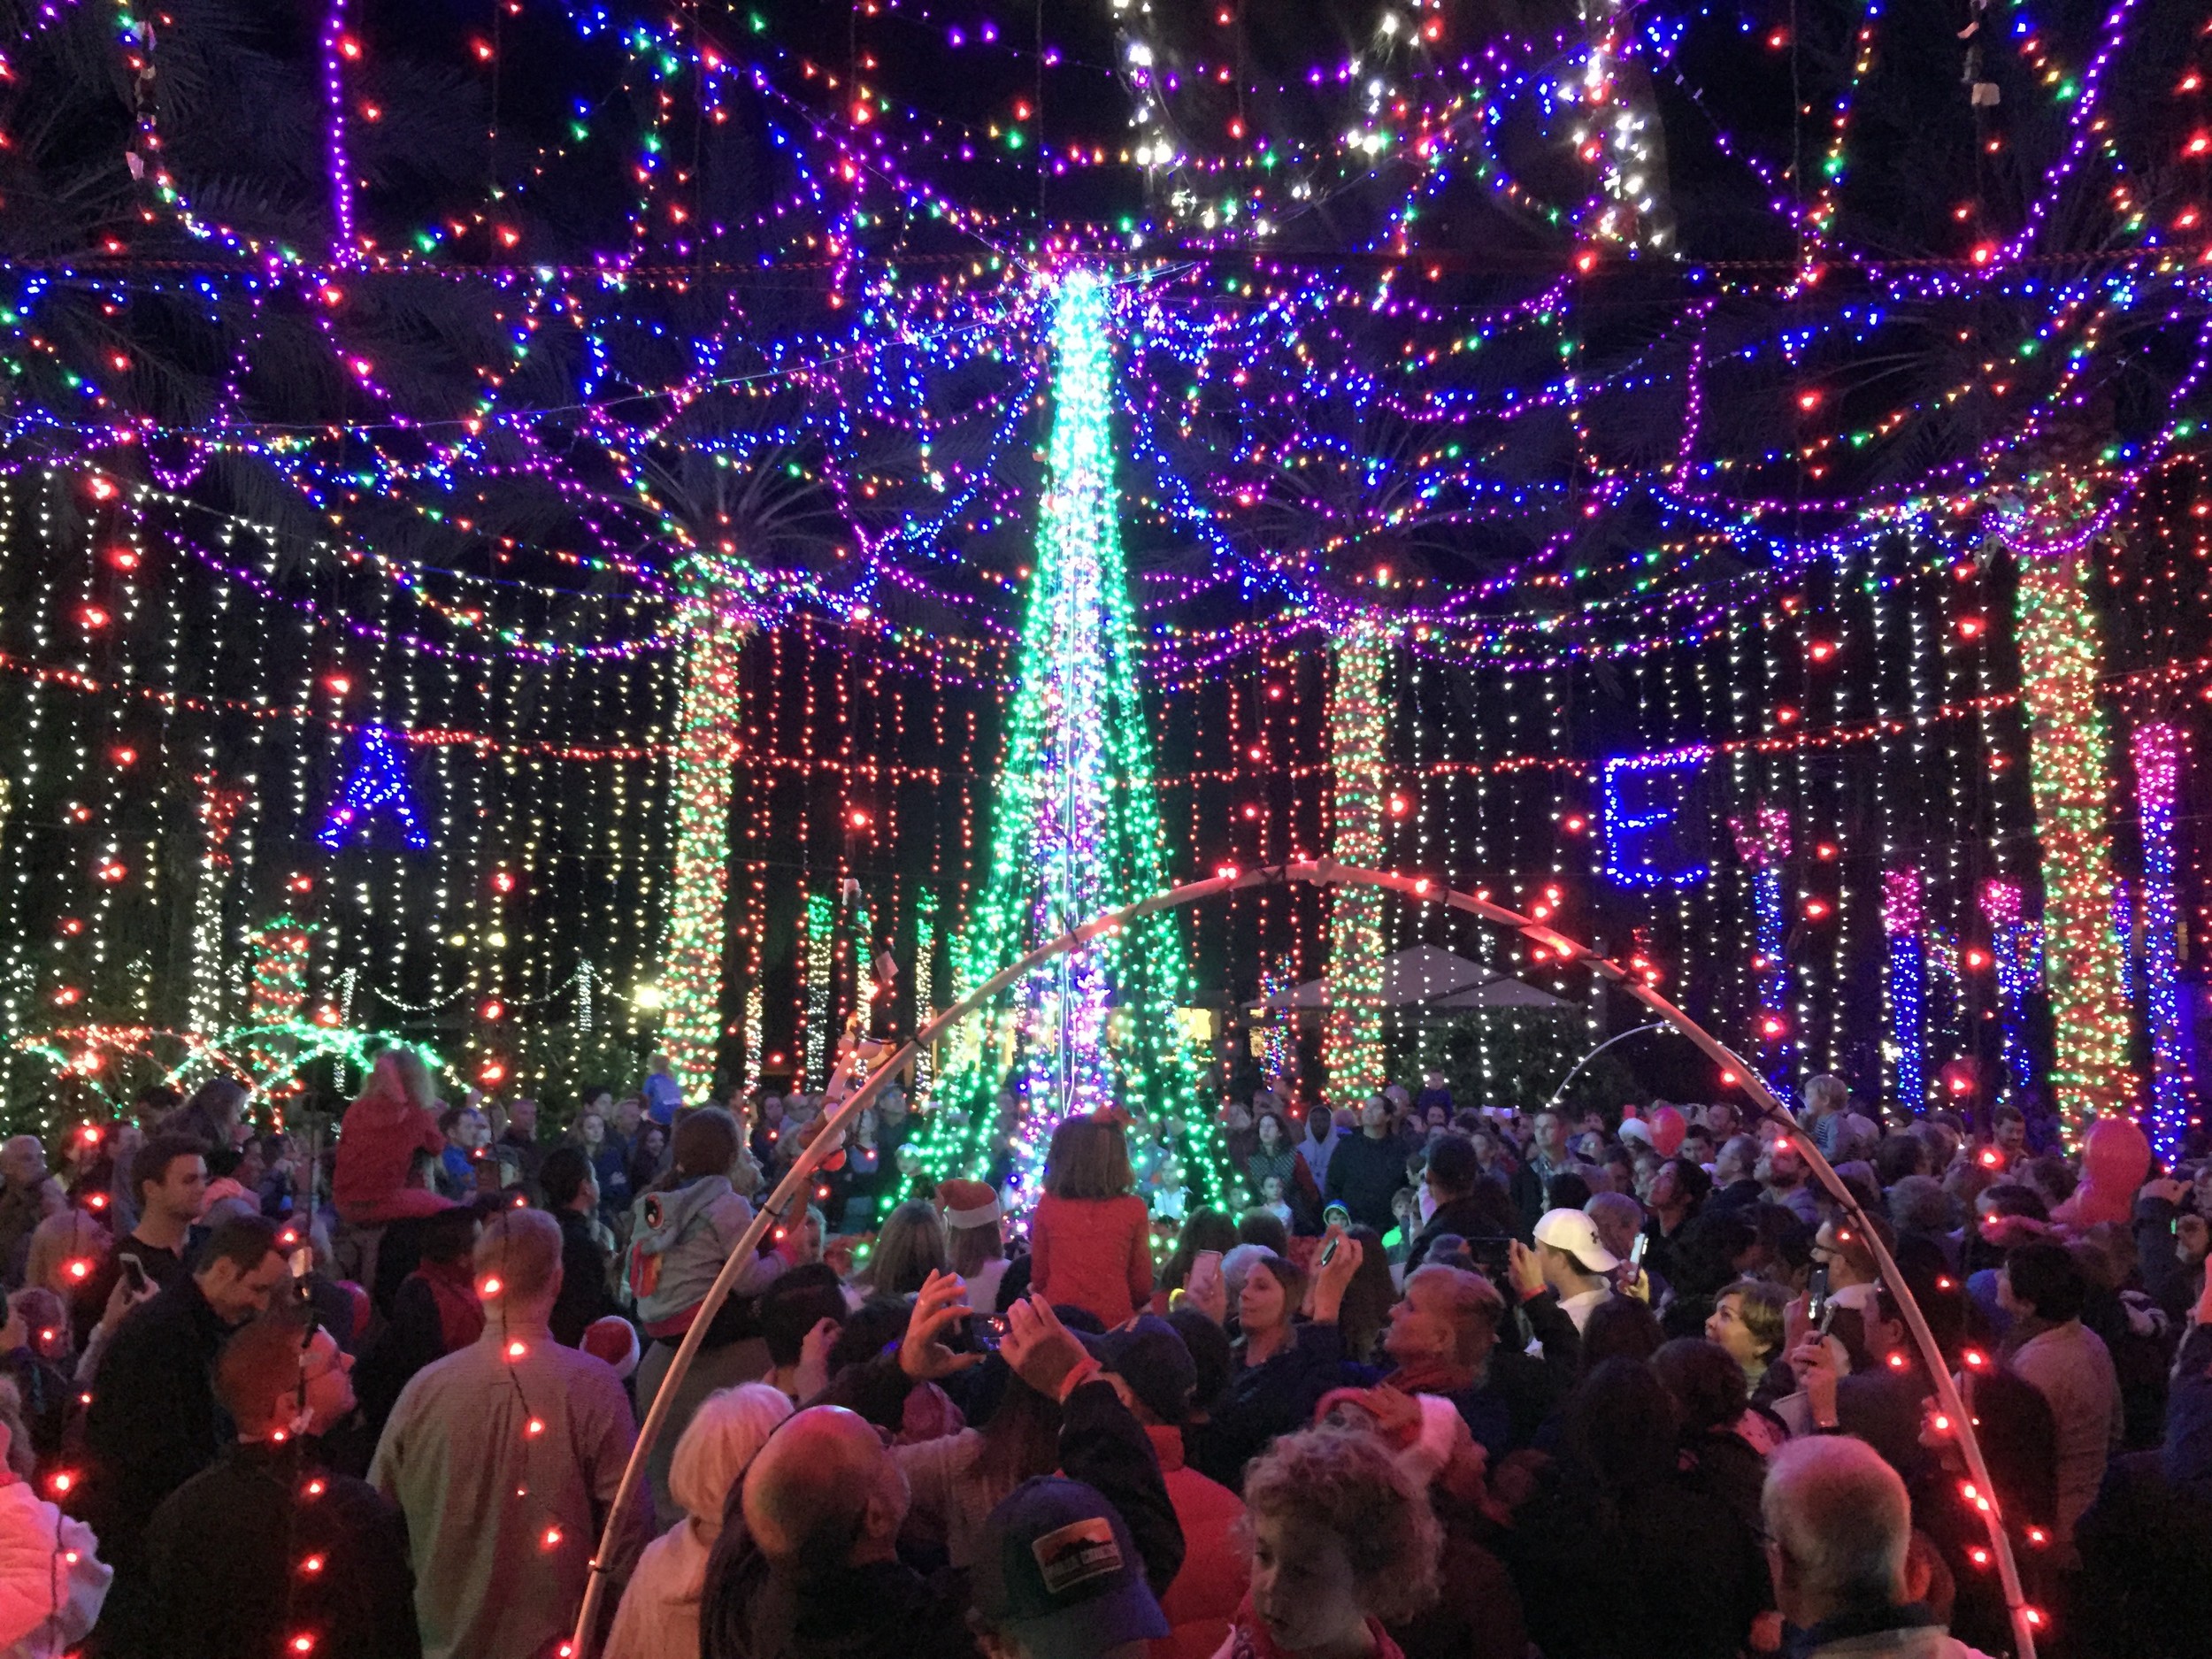 Nocatee residents celebrate the holiday season by taking in the lights at Nocatee-A-Glow.